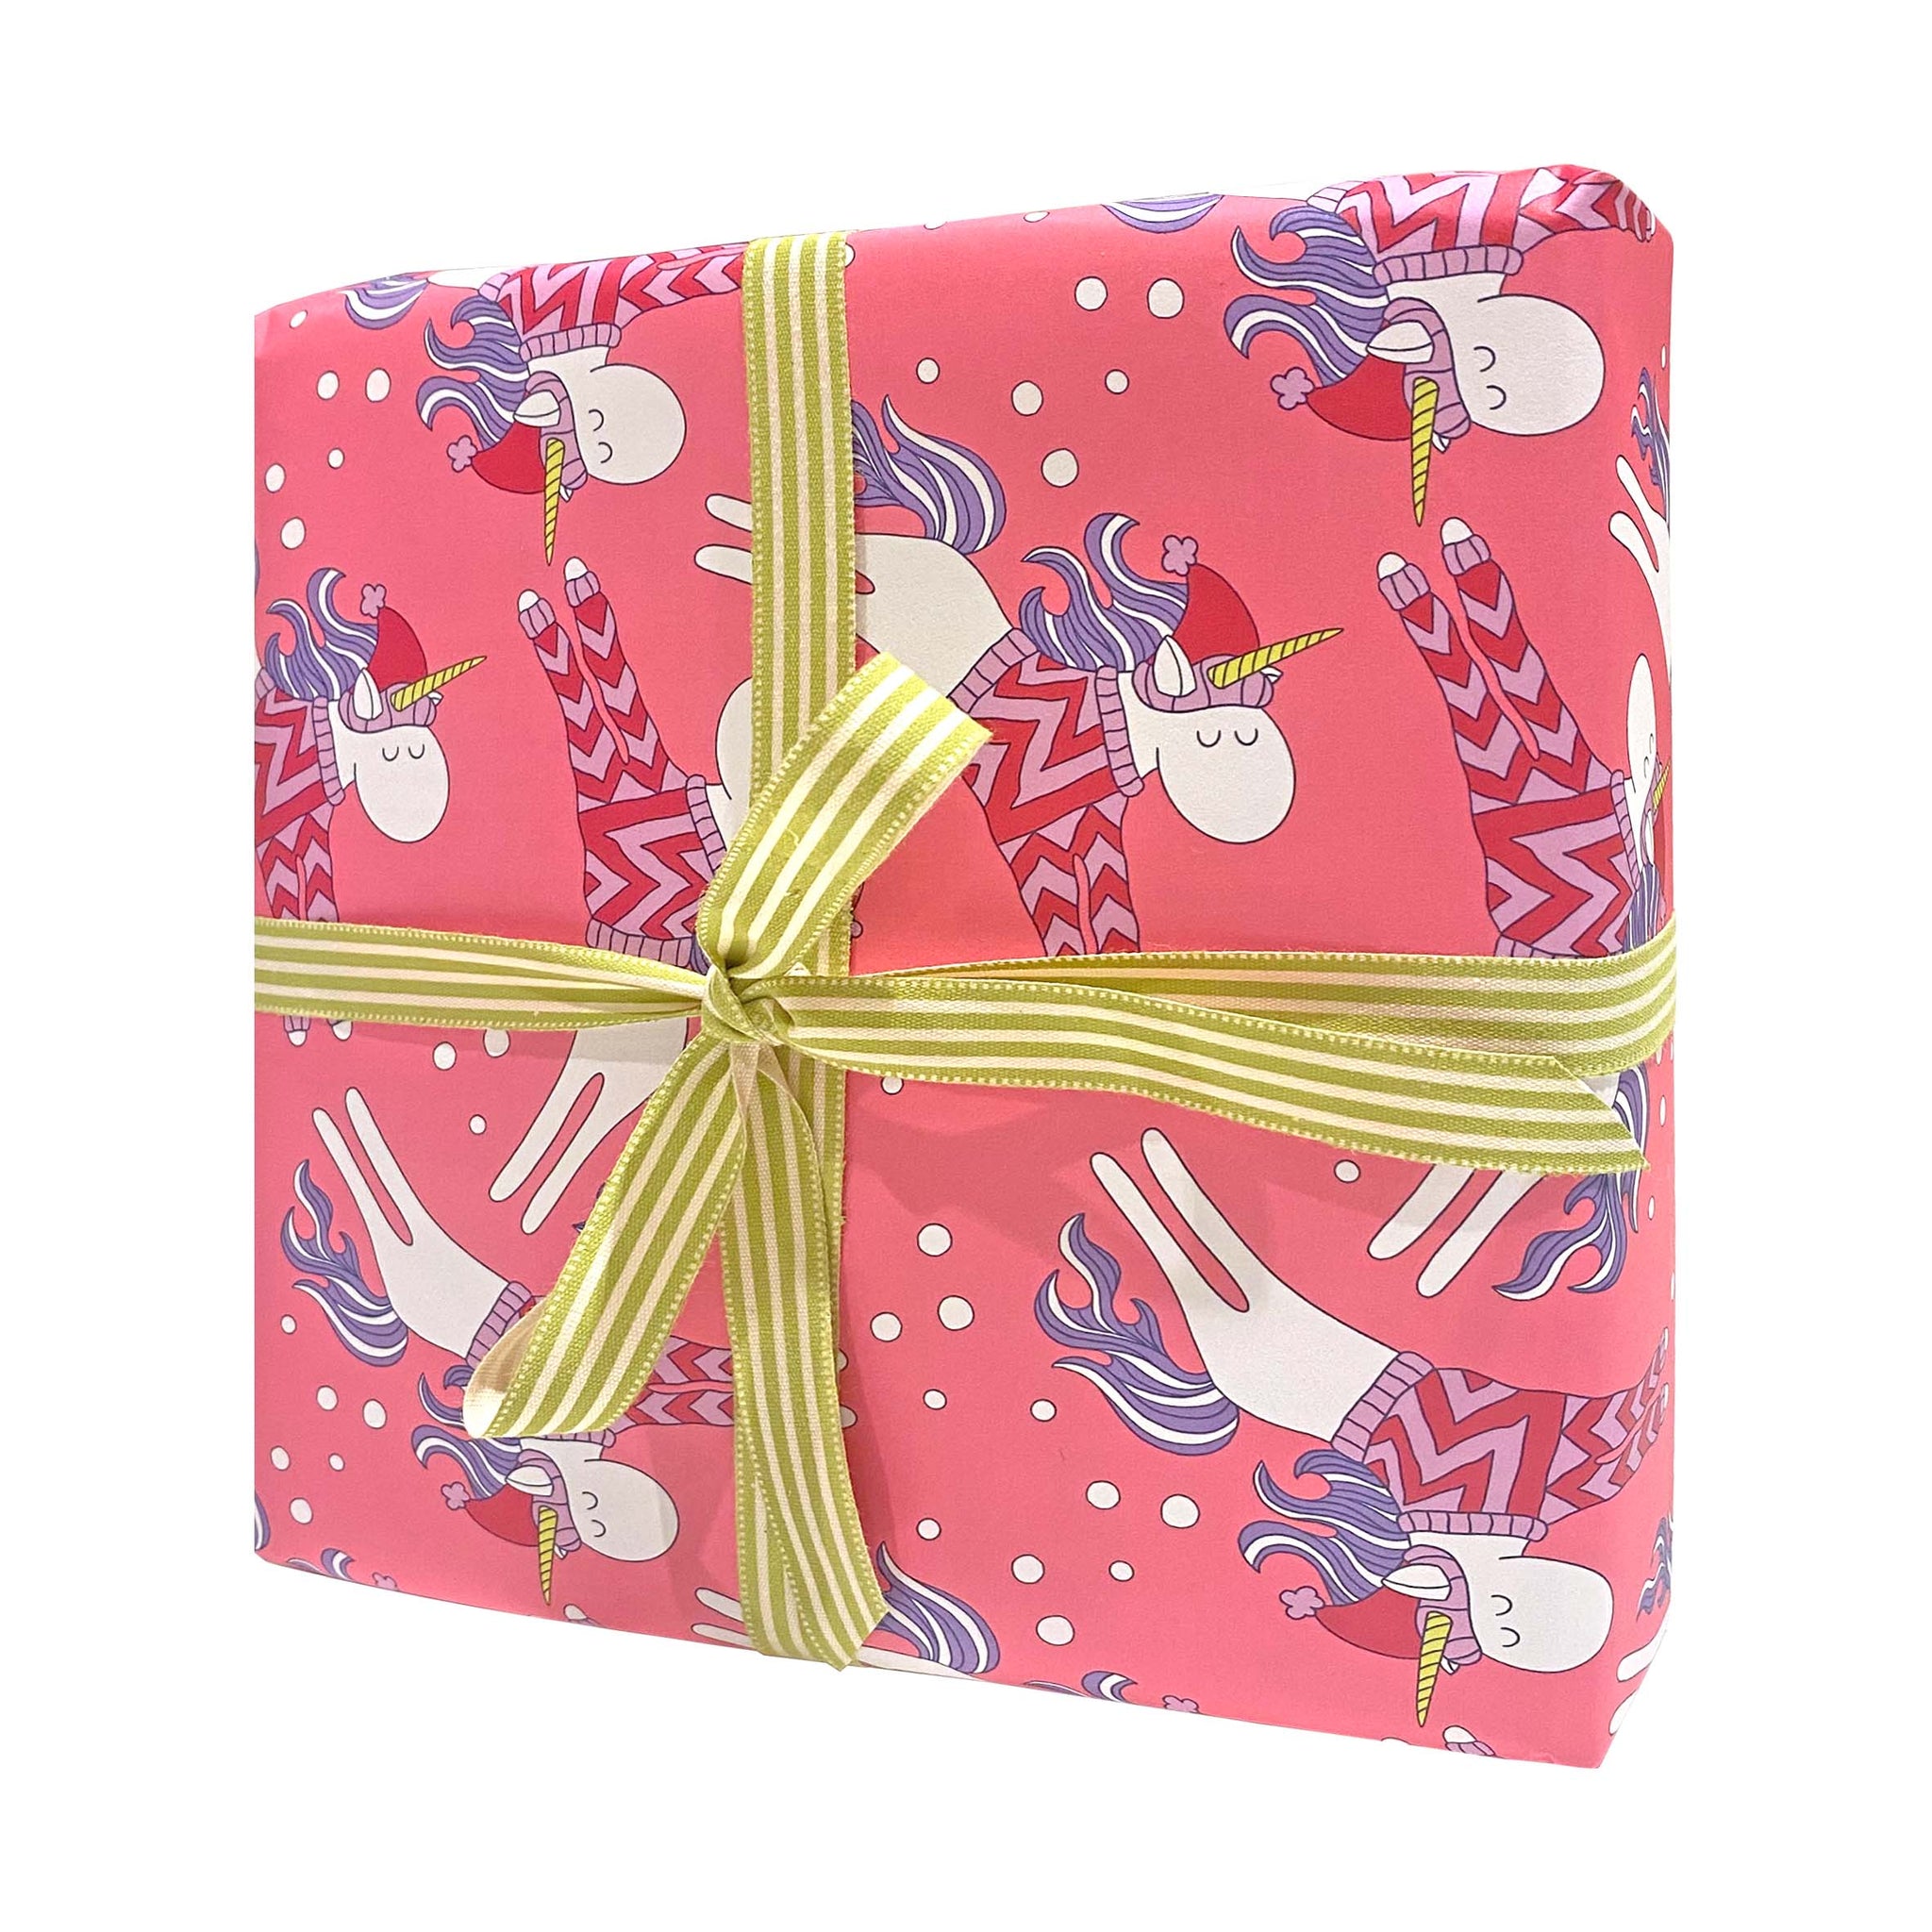 Unicorn Christmas Wrapping Paper and Gift Tags - Neon Magpie